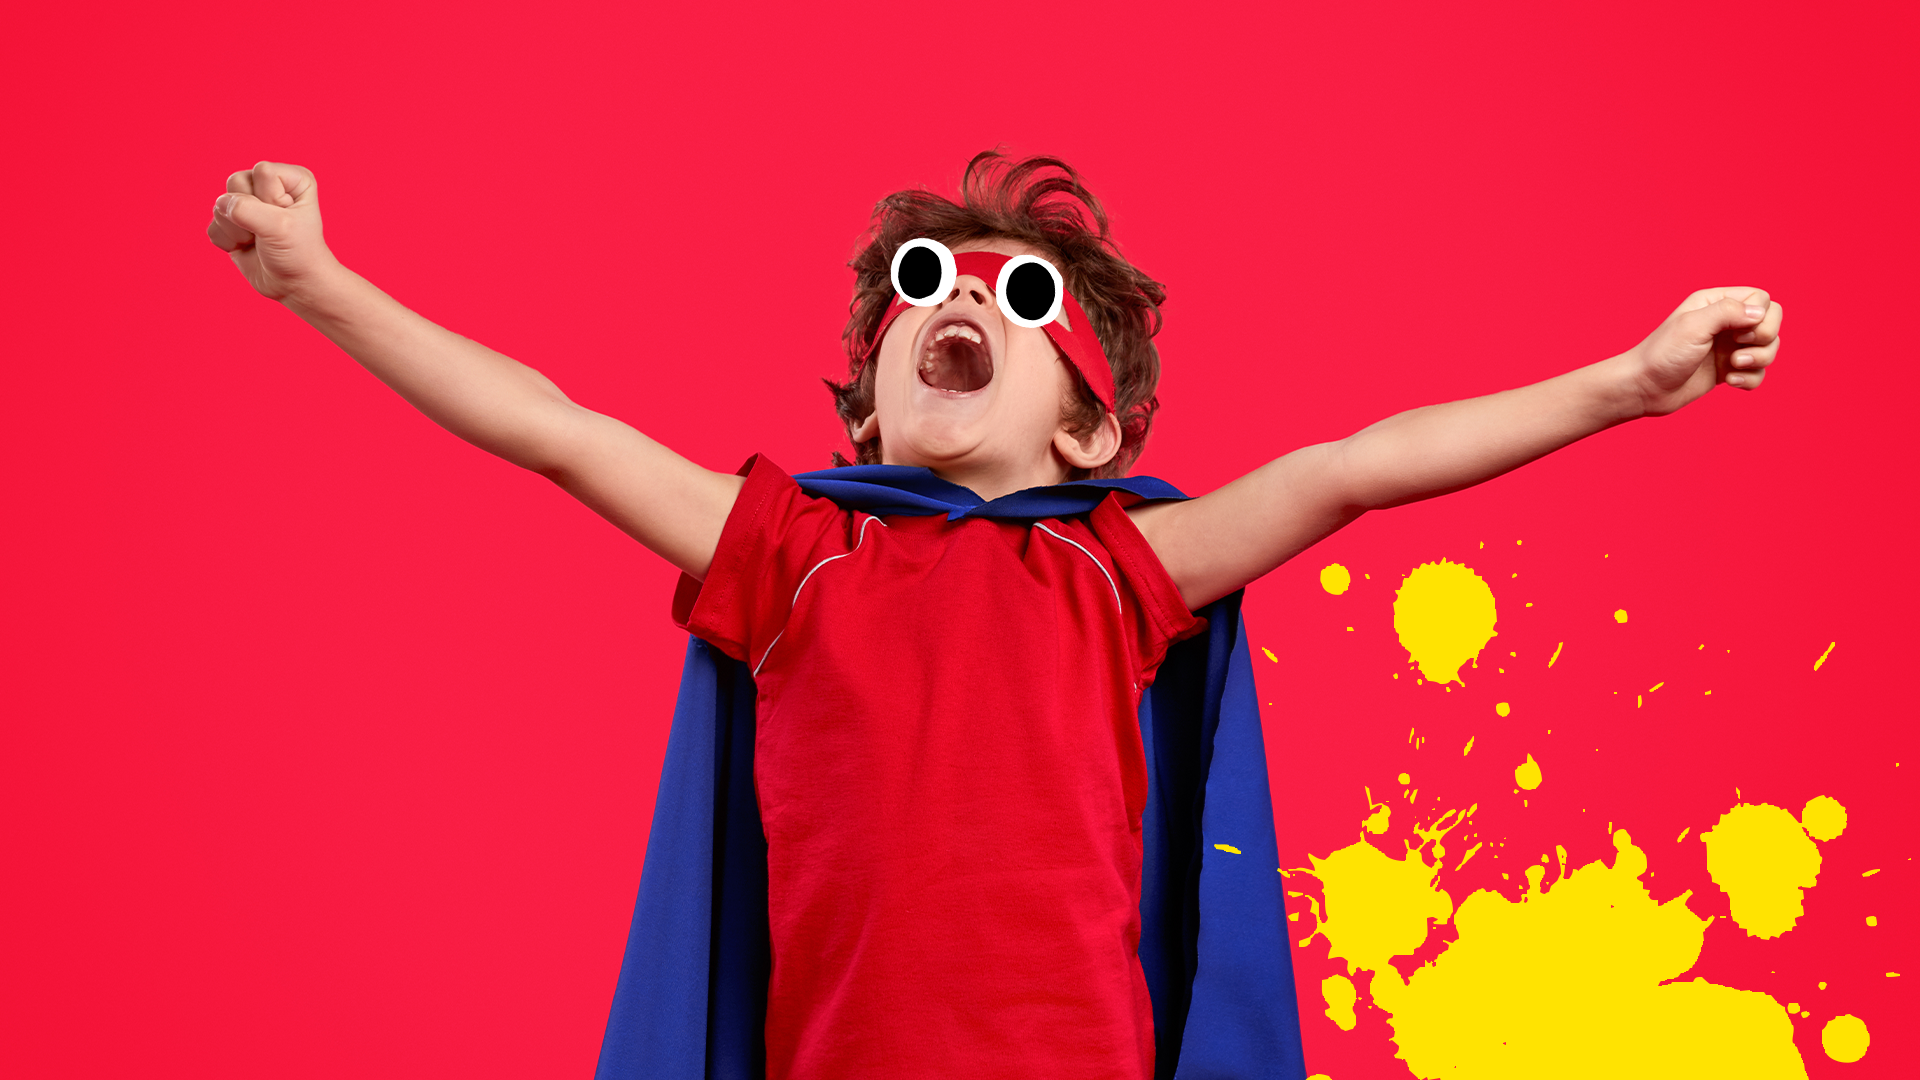 Boy dressed as superhero on red background 